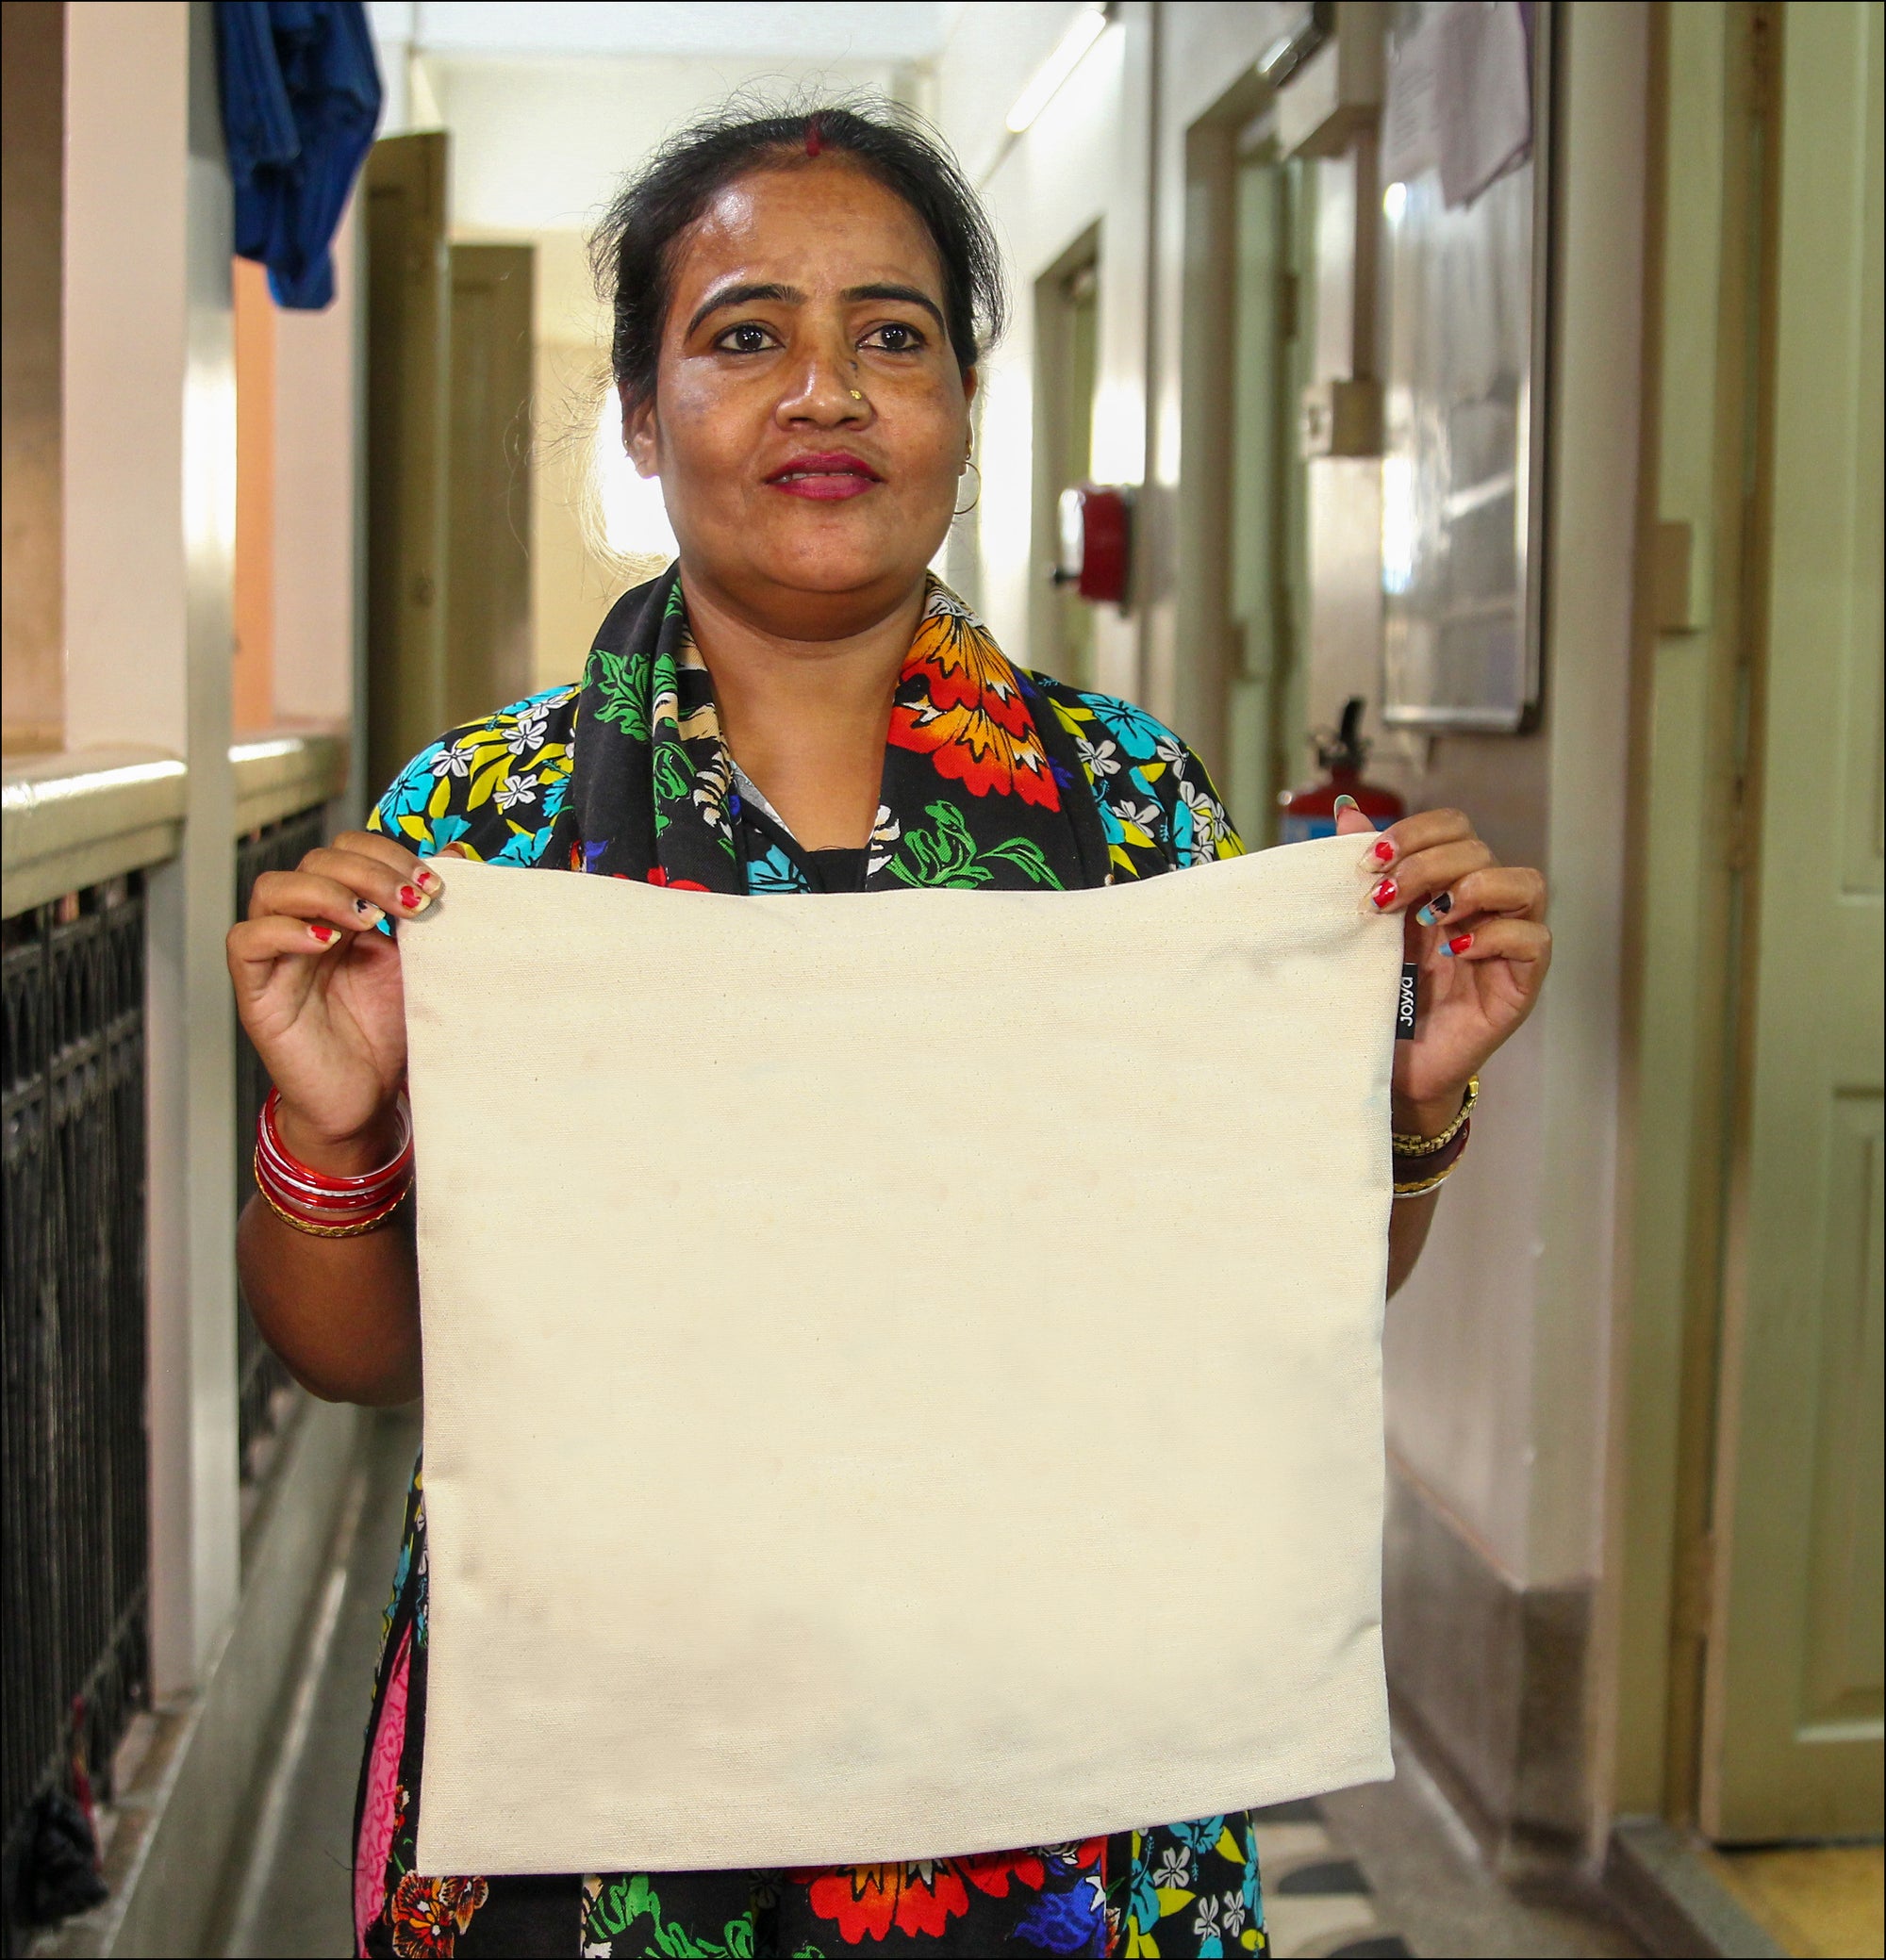 A Joyya staff woman is holding a blank natural color cotton canvas tote bag from each corner showing it to the camera.